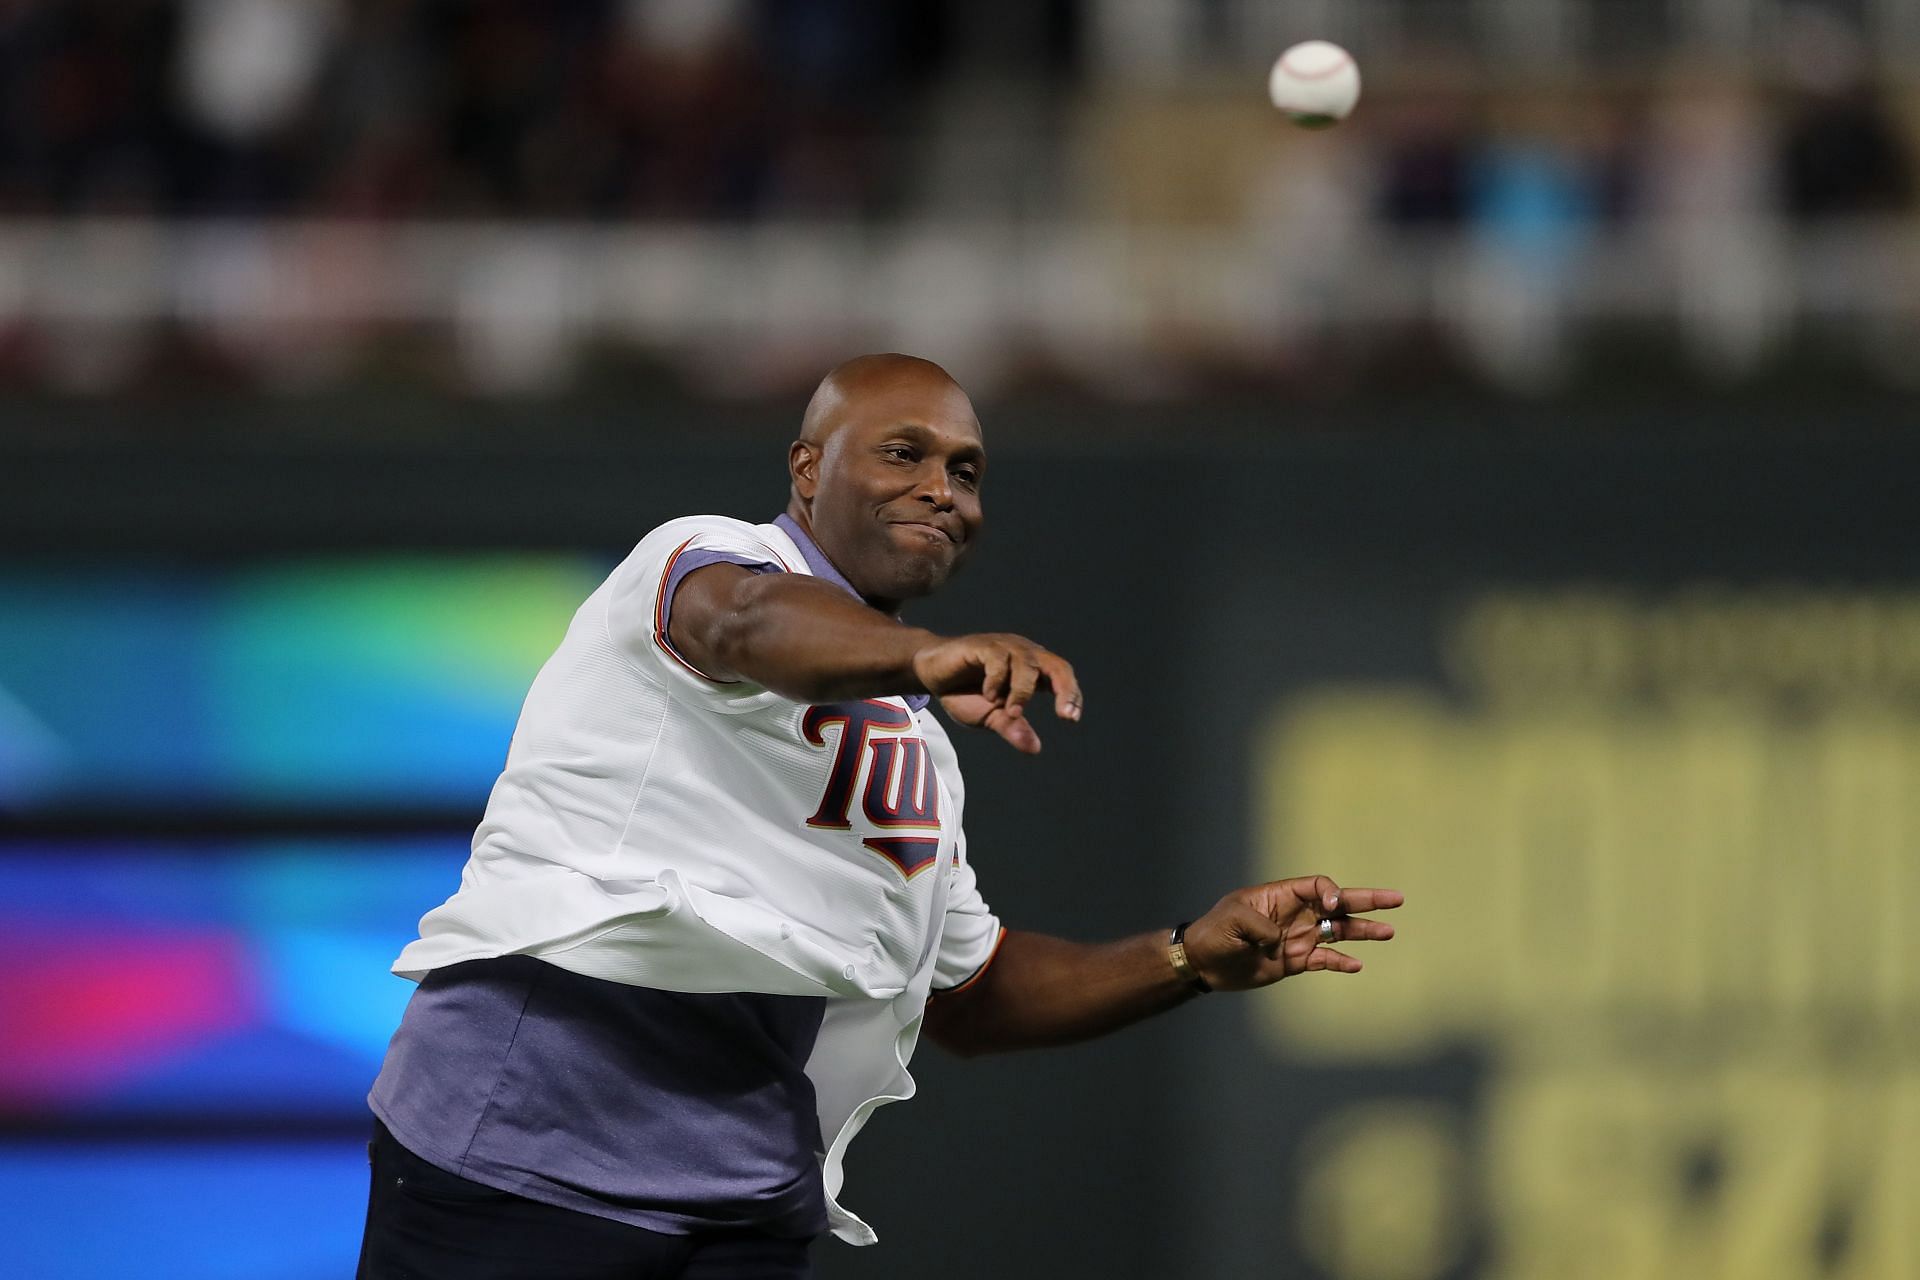 After retiring from MLB, Torii Hunter could have idled. Instead, he dove  into entrepreneurship - The Athletic